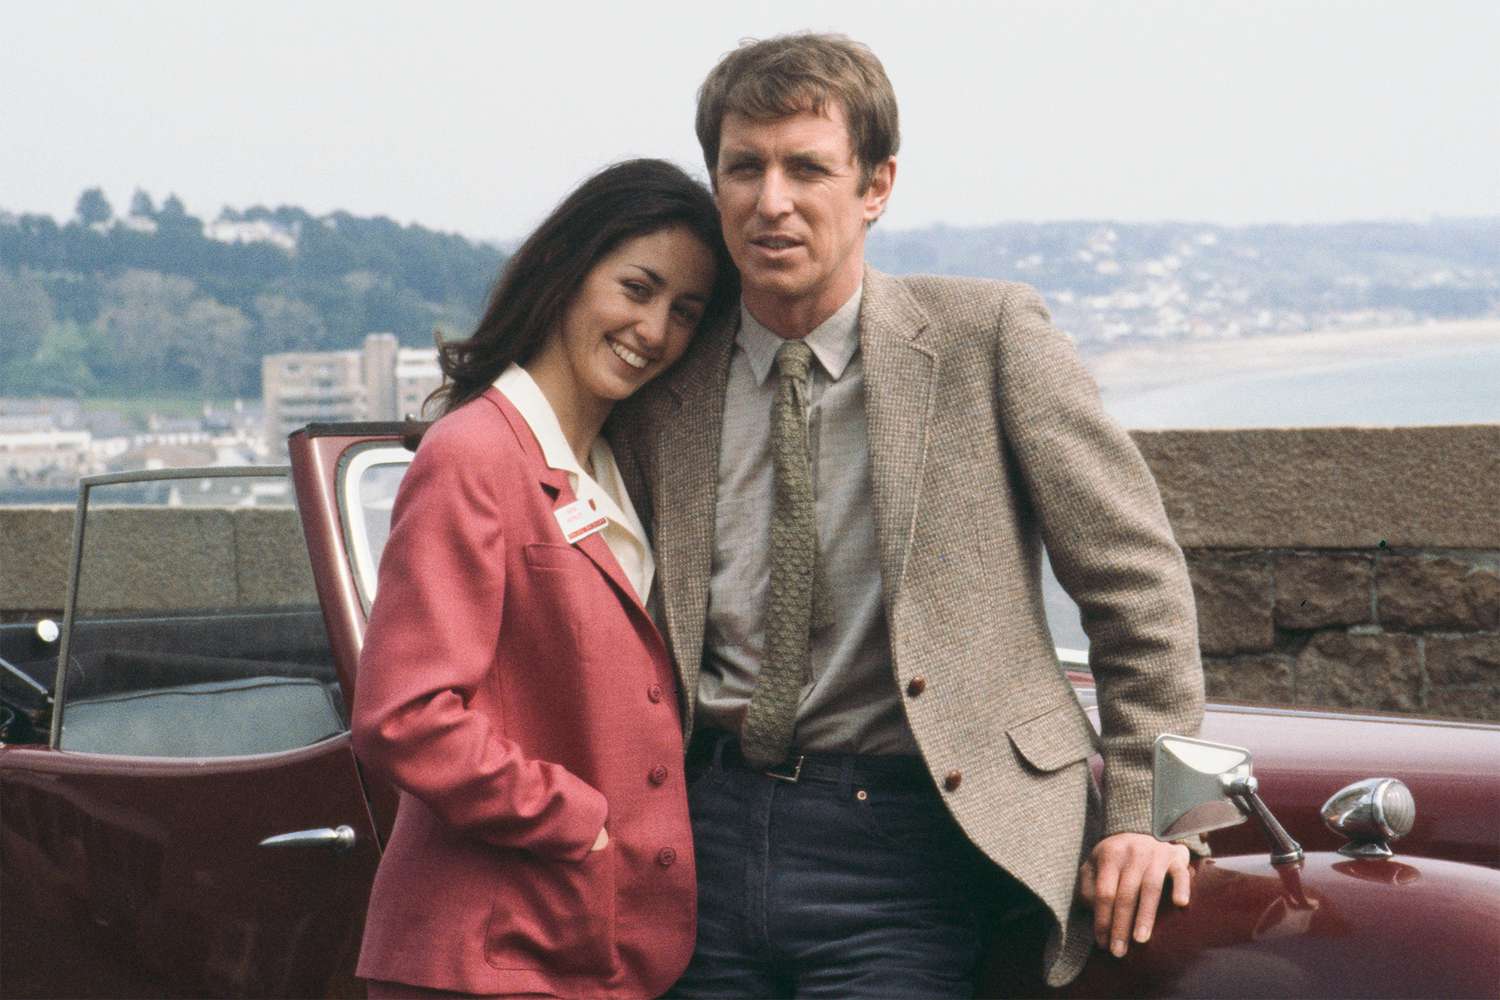 ‘Bergerac’ from ‘Loch Henry’ episode of ‘Black Mirror’ is a real show